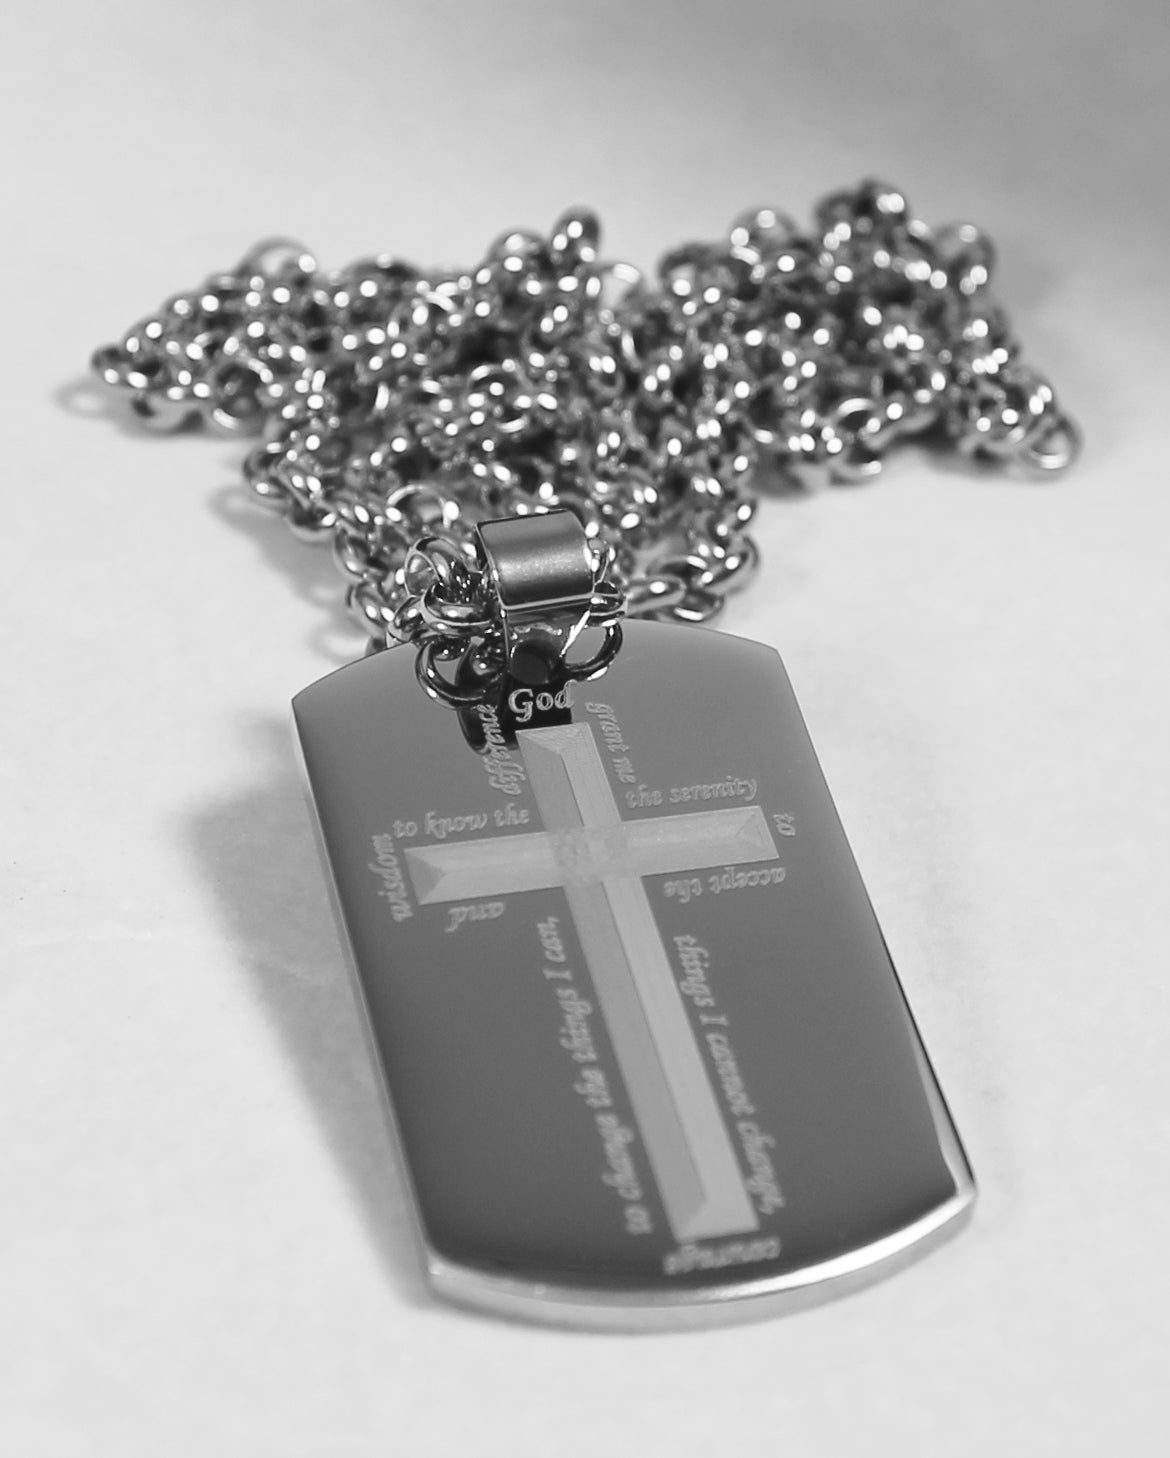 SERENITY PRAYER AROUND CROSS SOLID THICK STAINLESS STEEL RELIGION NECKLACE - Samstagsandmore